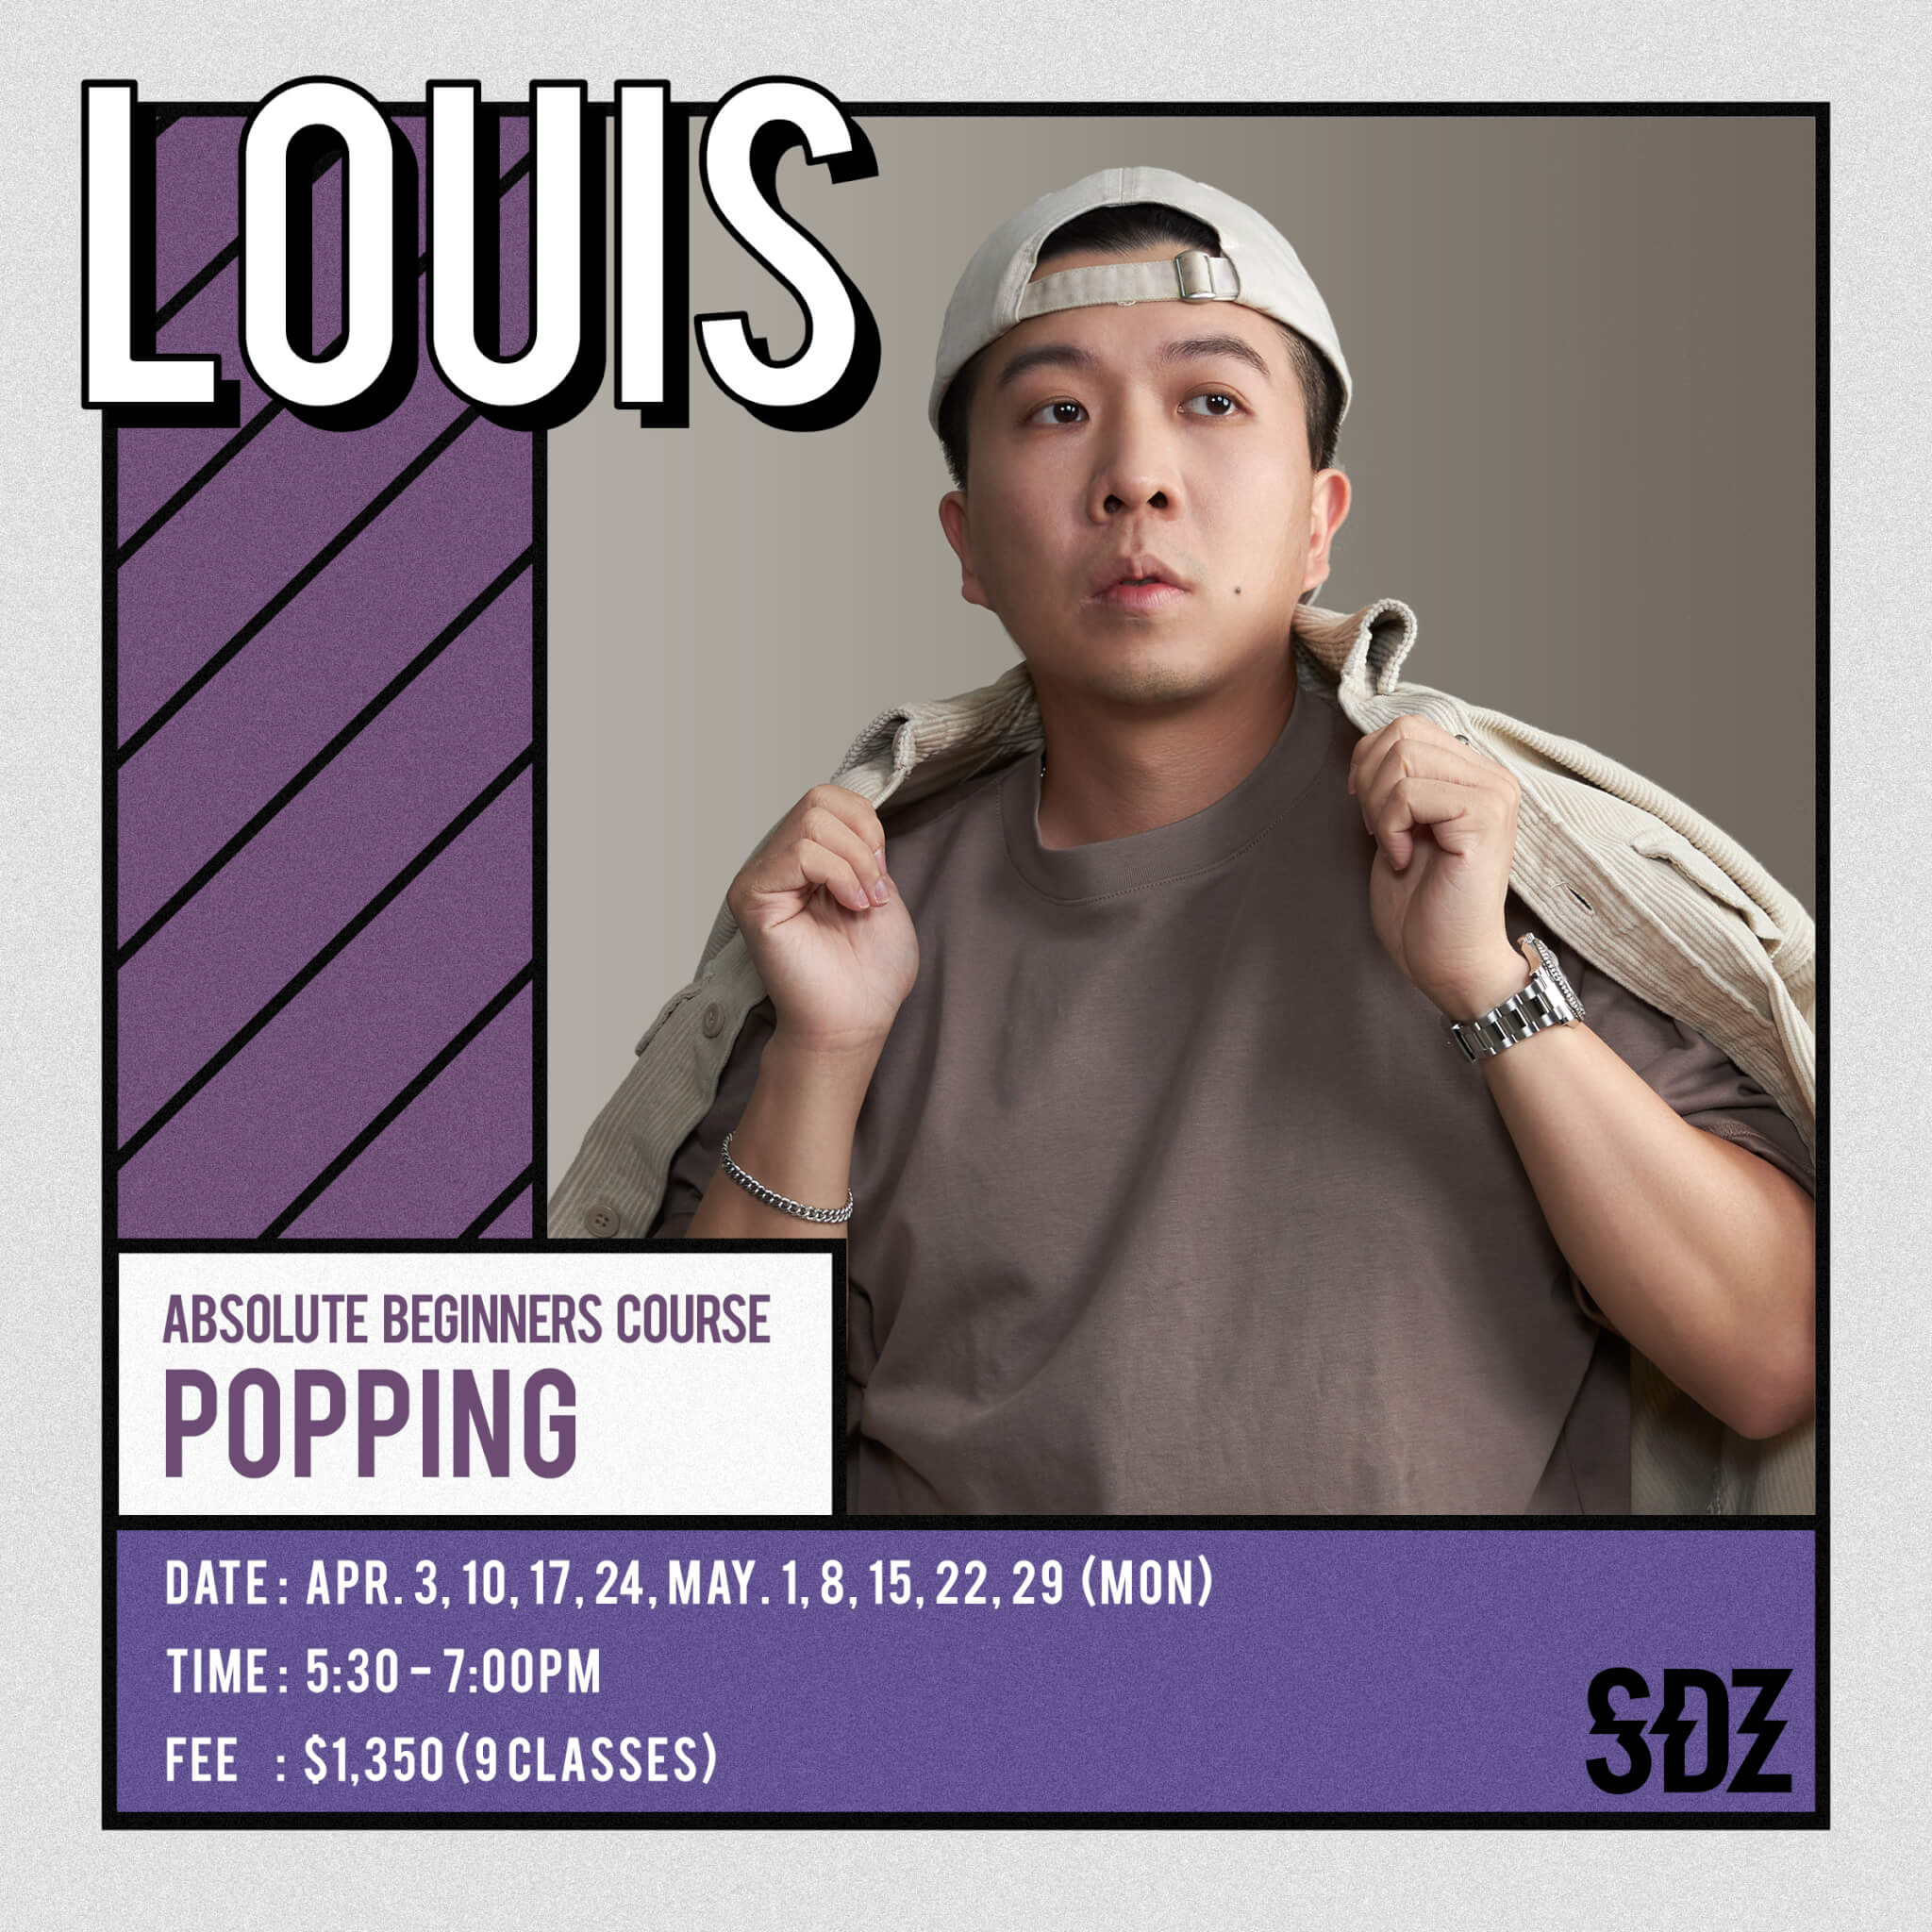 Absolute Beginners Course - Popping - Louis